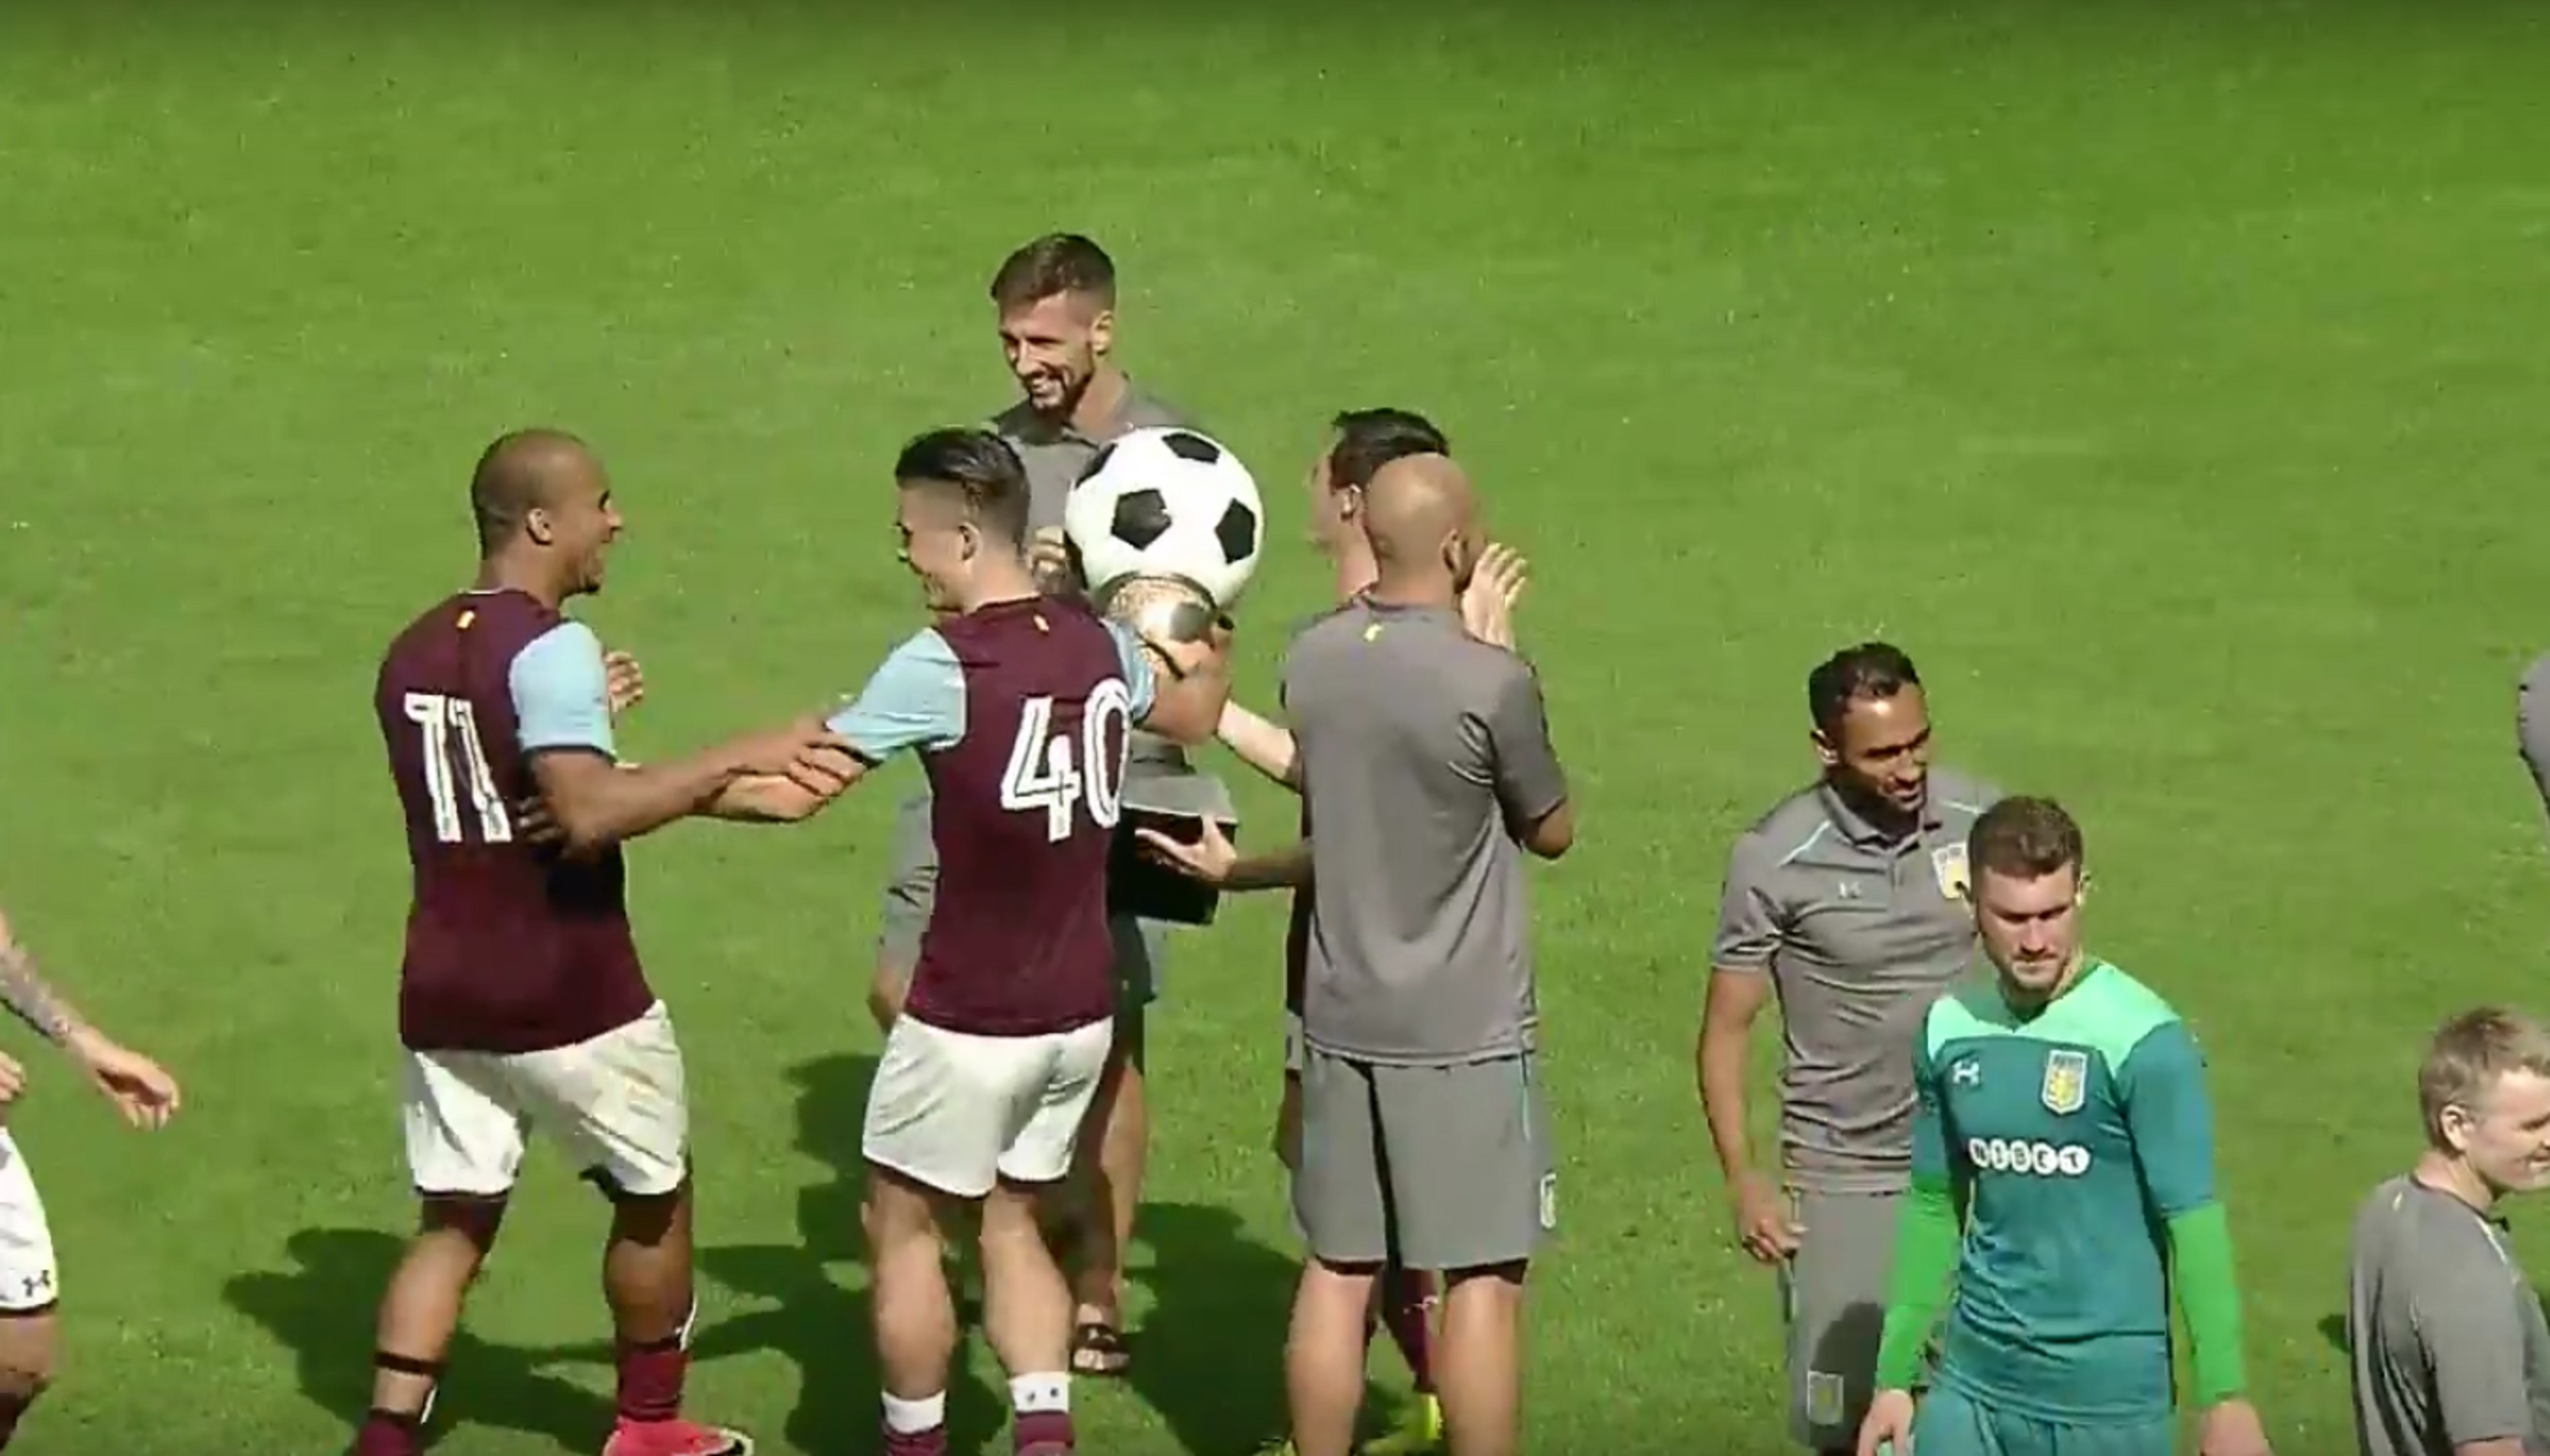 Aston Villa footballers celebrate winning the Cup of Traditions